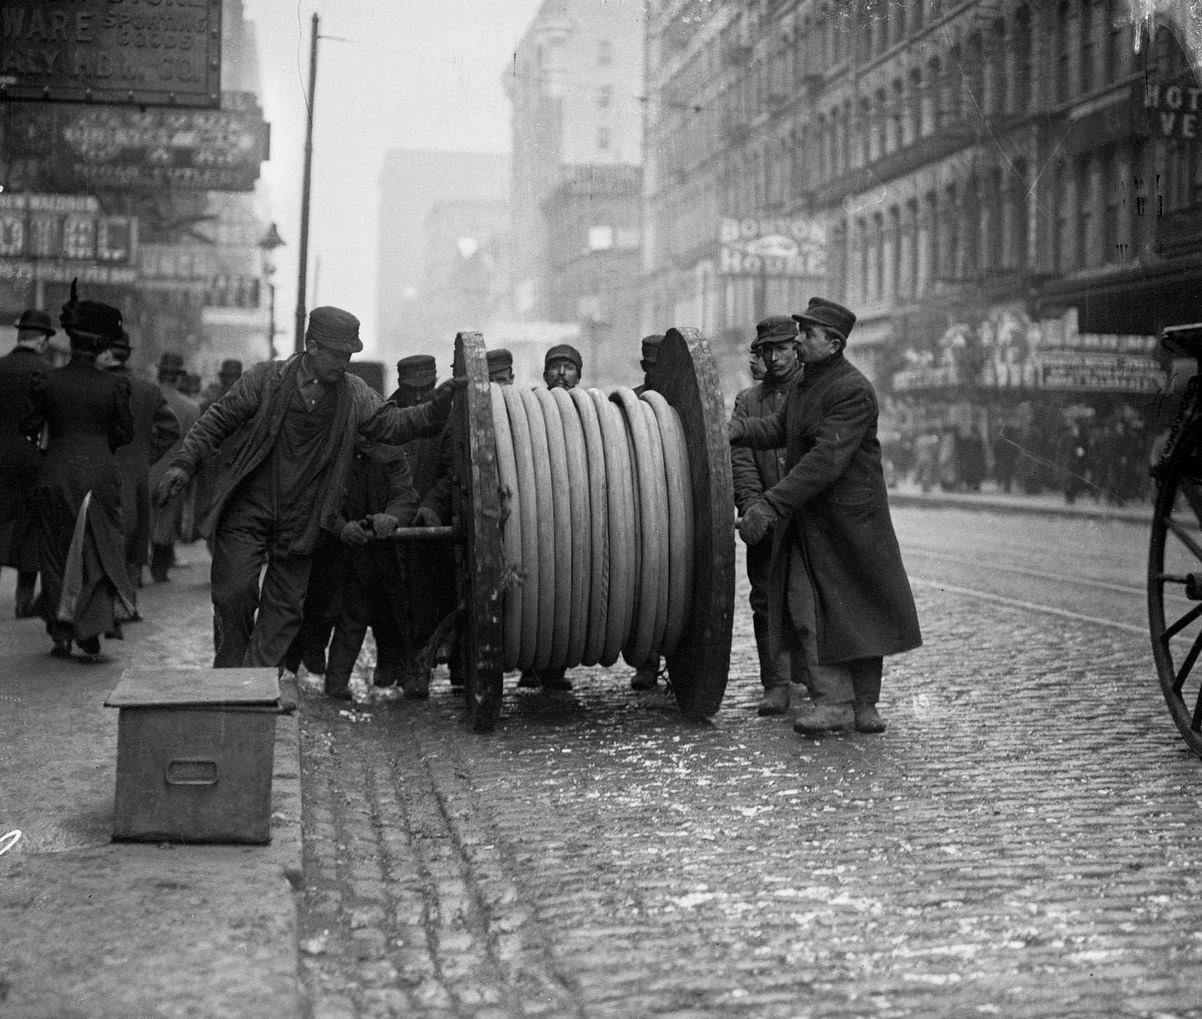 Men rolling a large wheel of underground telephone cable on a business street, Chicago, Illinois, 1910s.